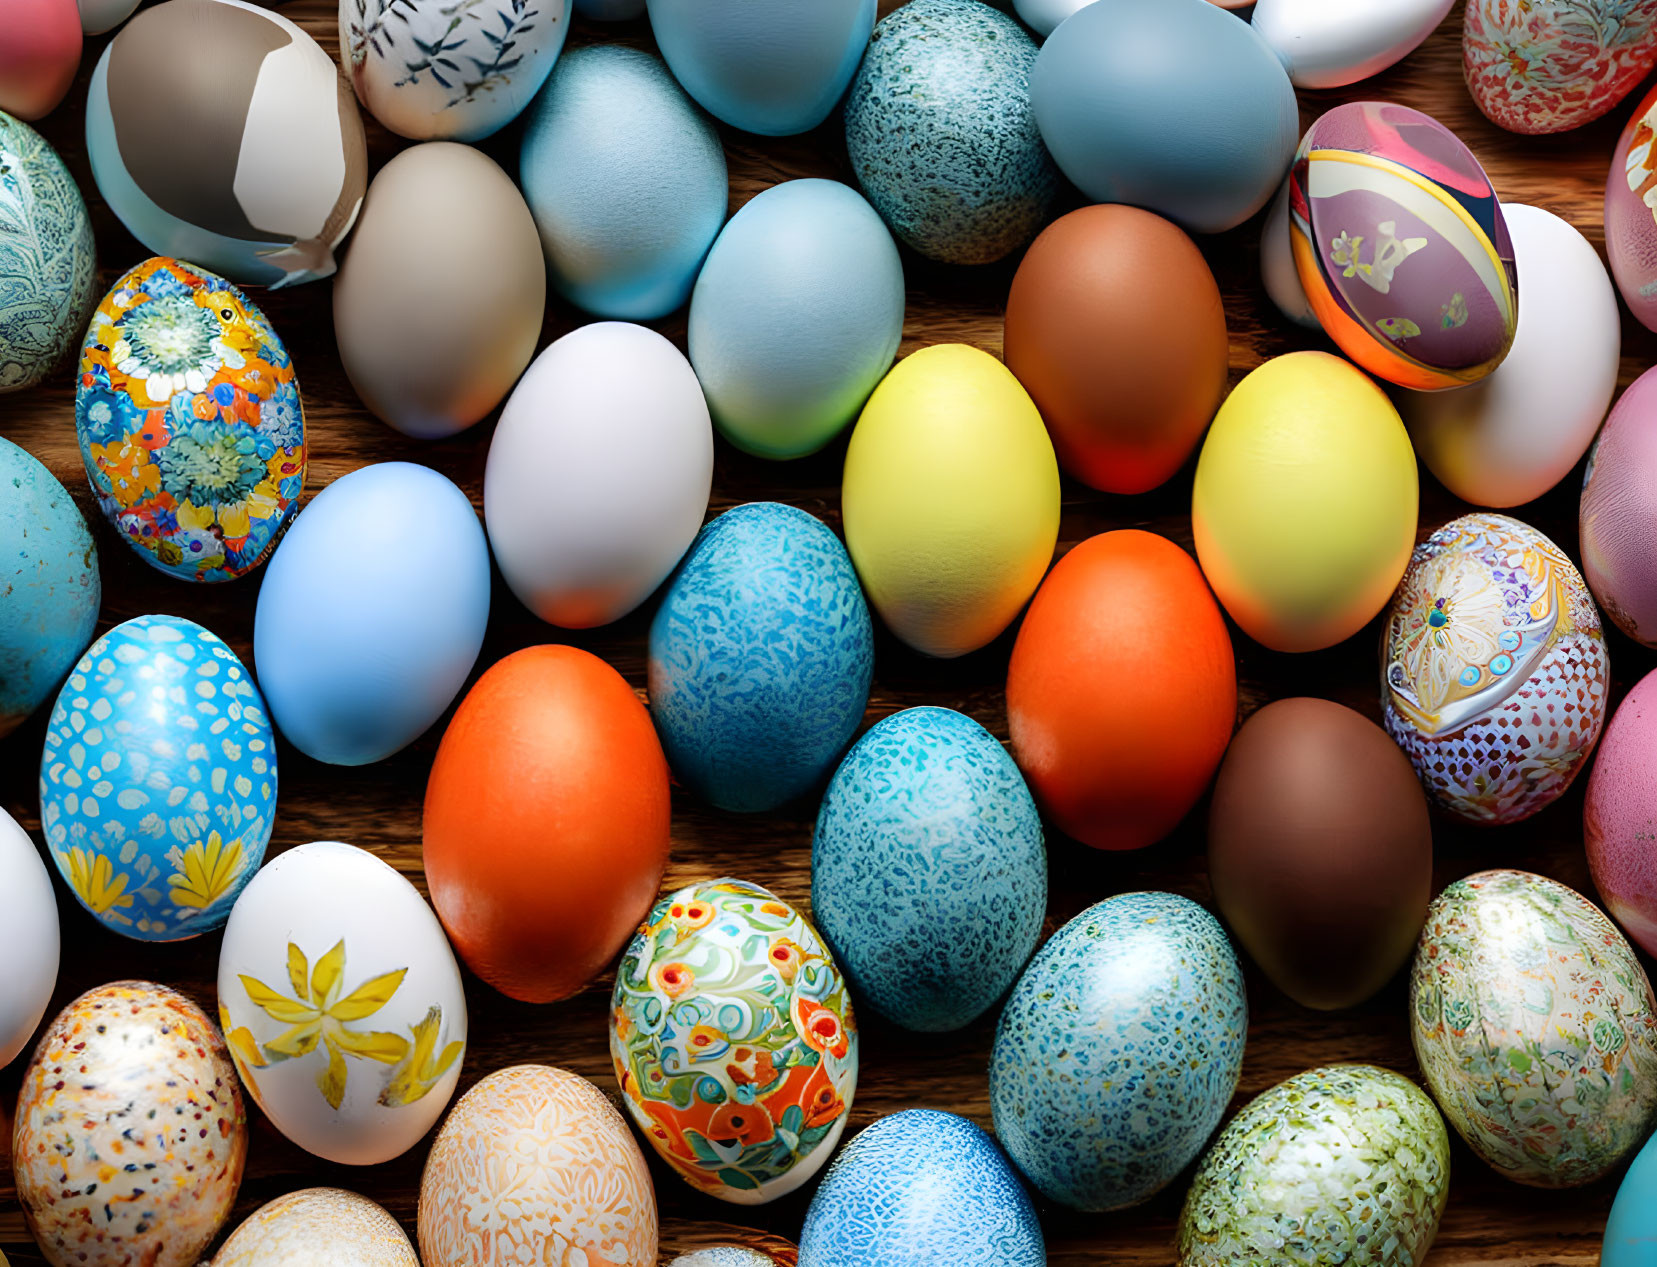 Vibrant Easter eggs displayed on wooden background